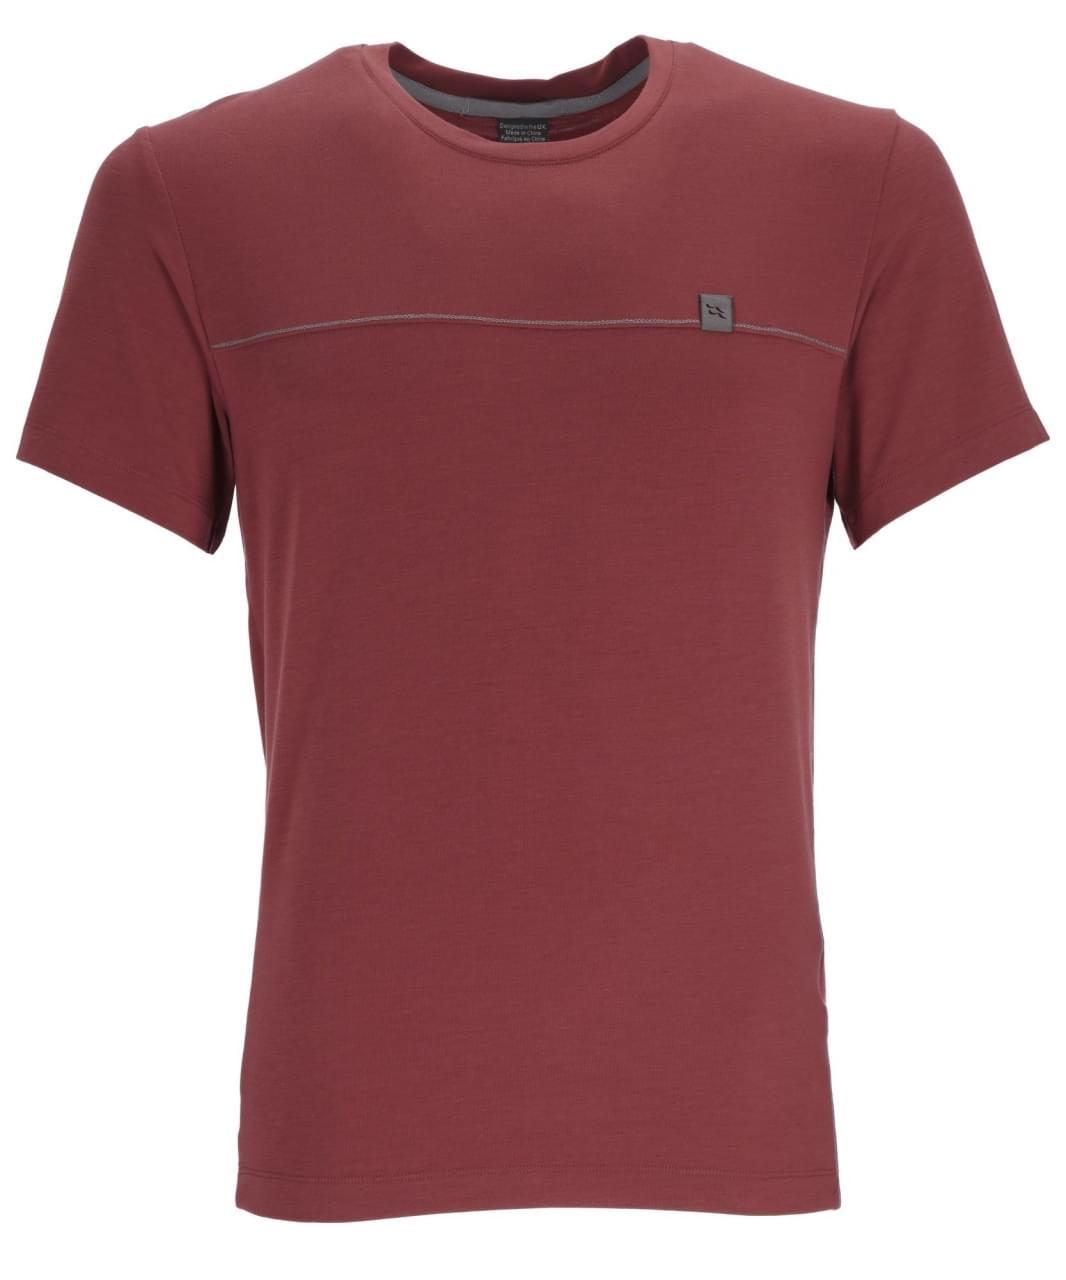 RAB Lateral T-shirt Heren Rood